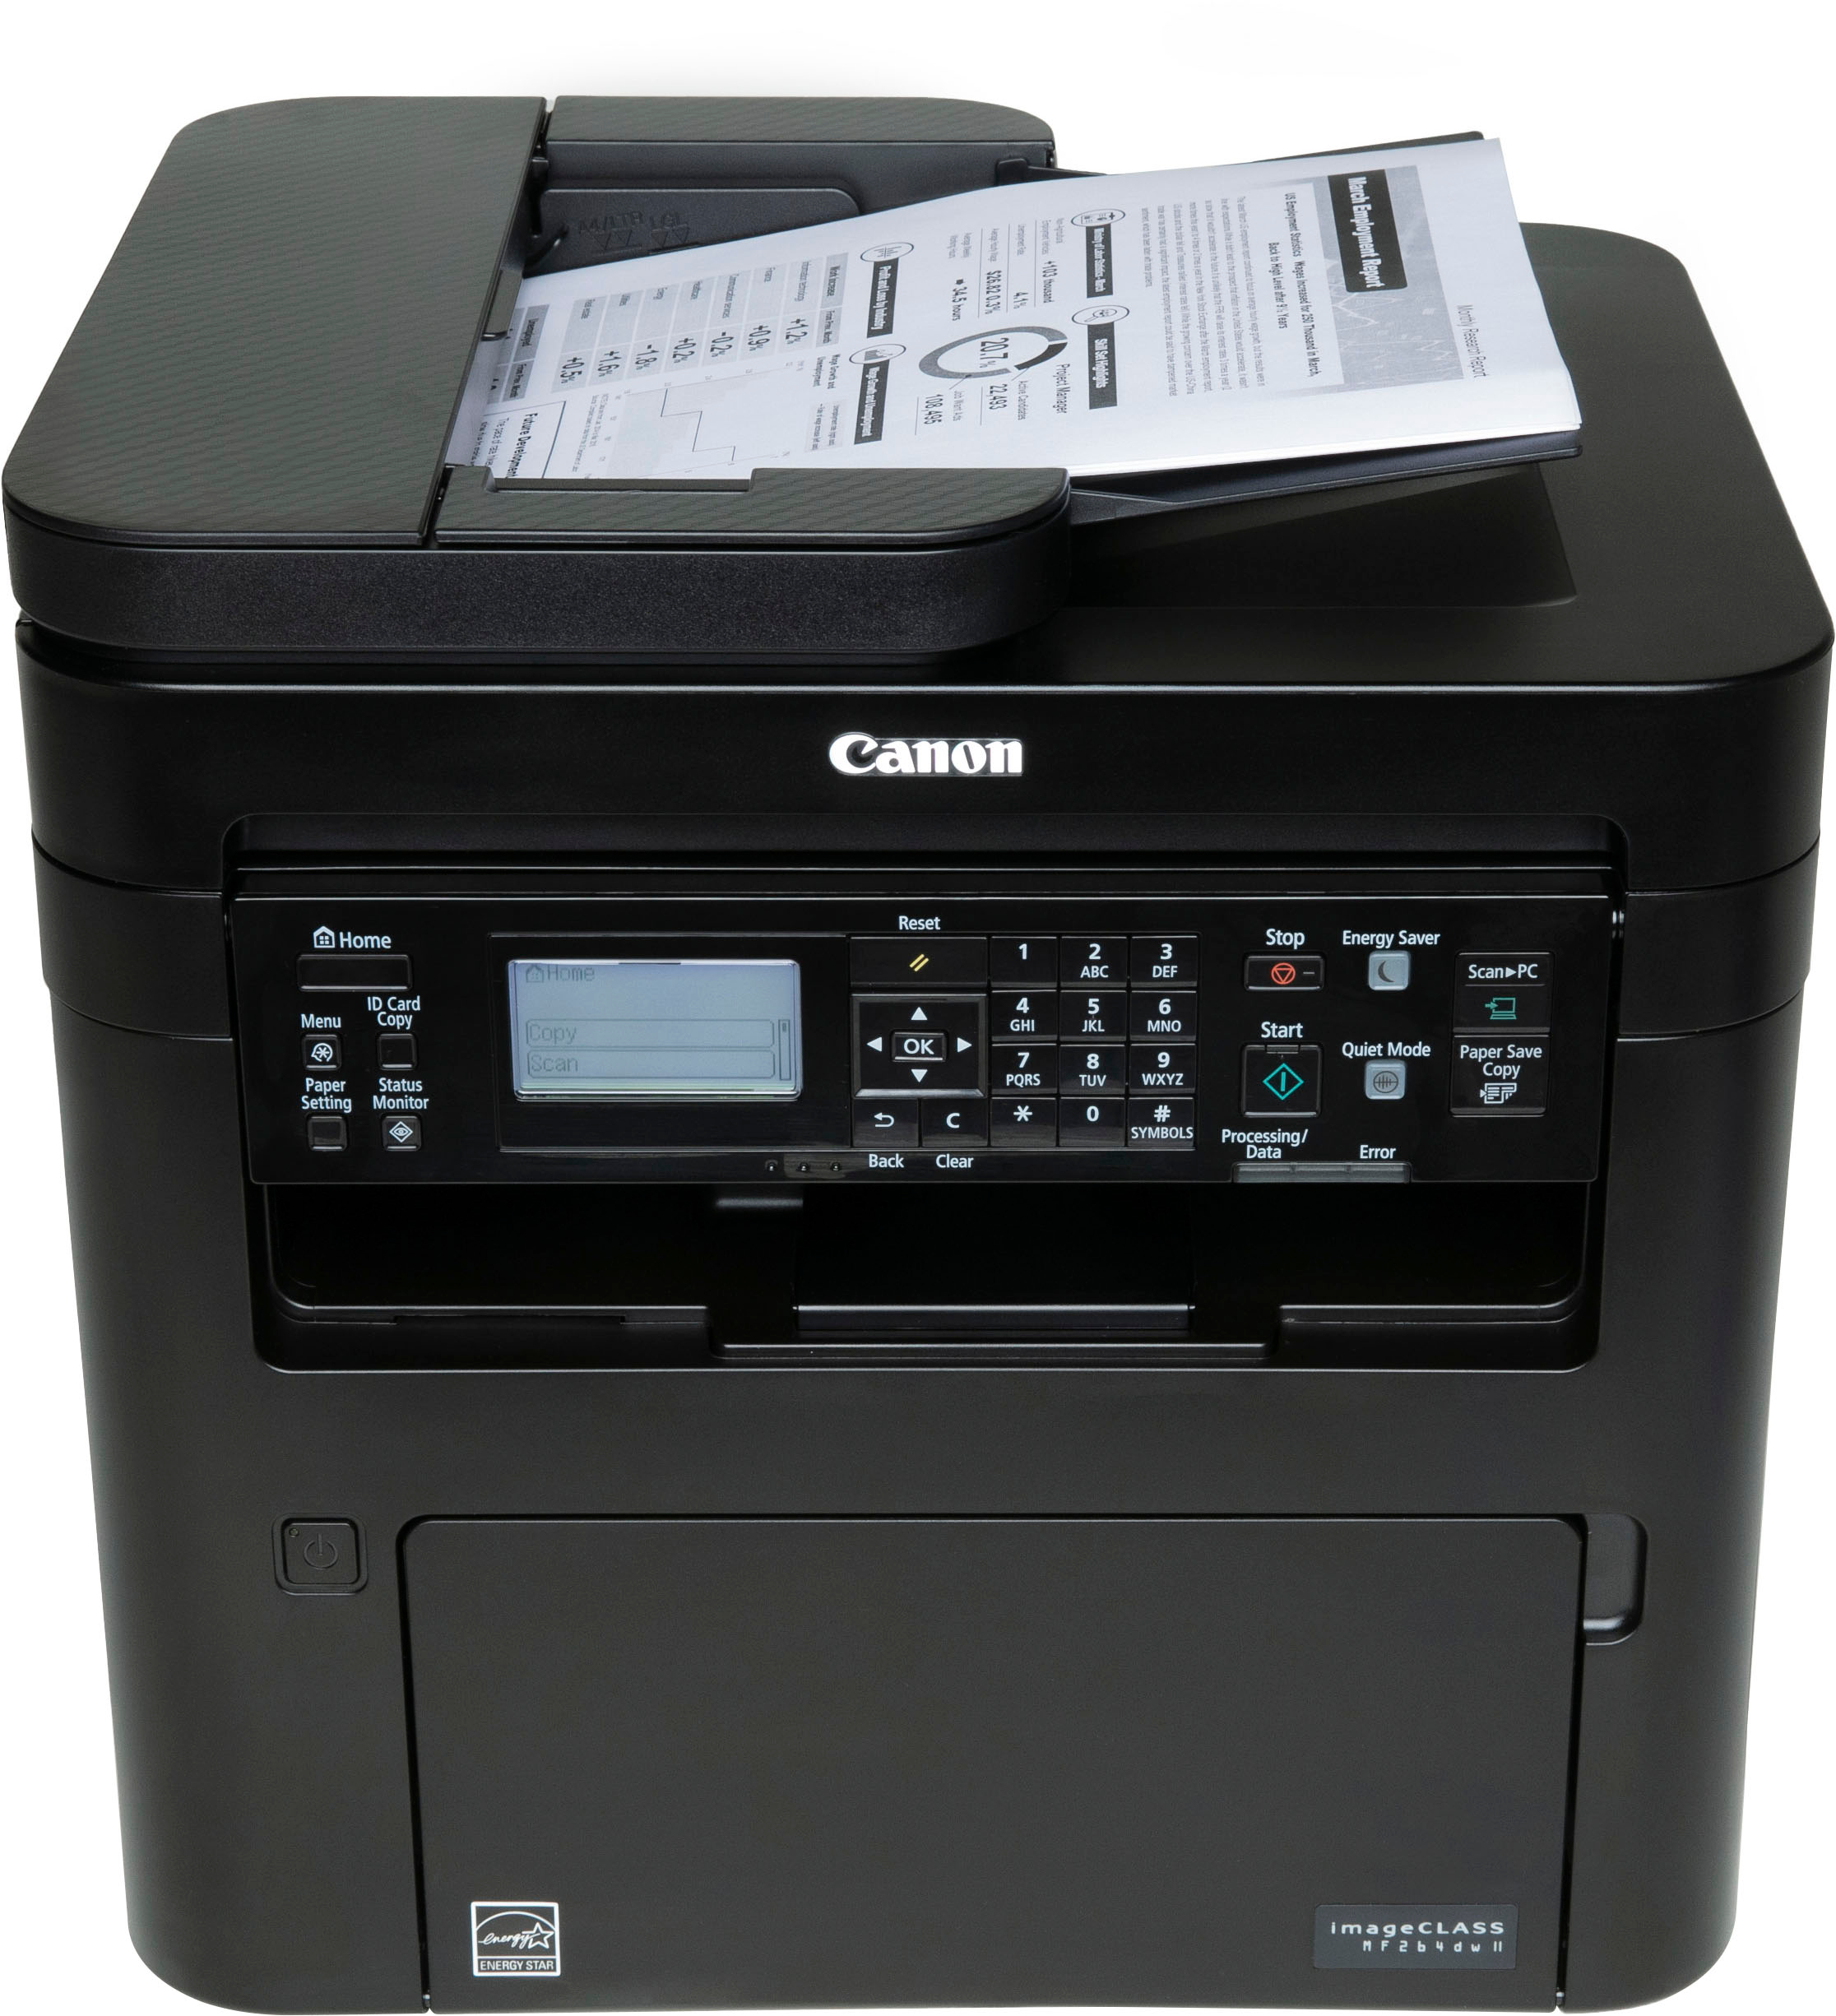 Left View: Canon - imageCLASS MF264dw II Wireless Black-and-White All-In-One Laser Printer - Black